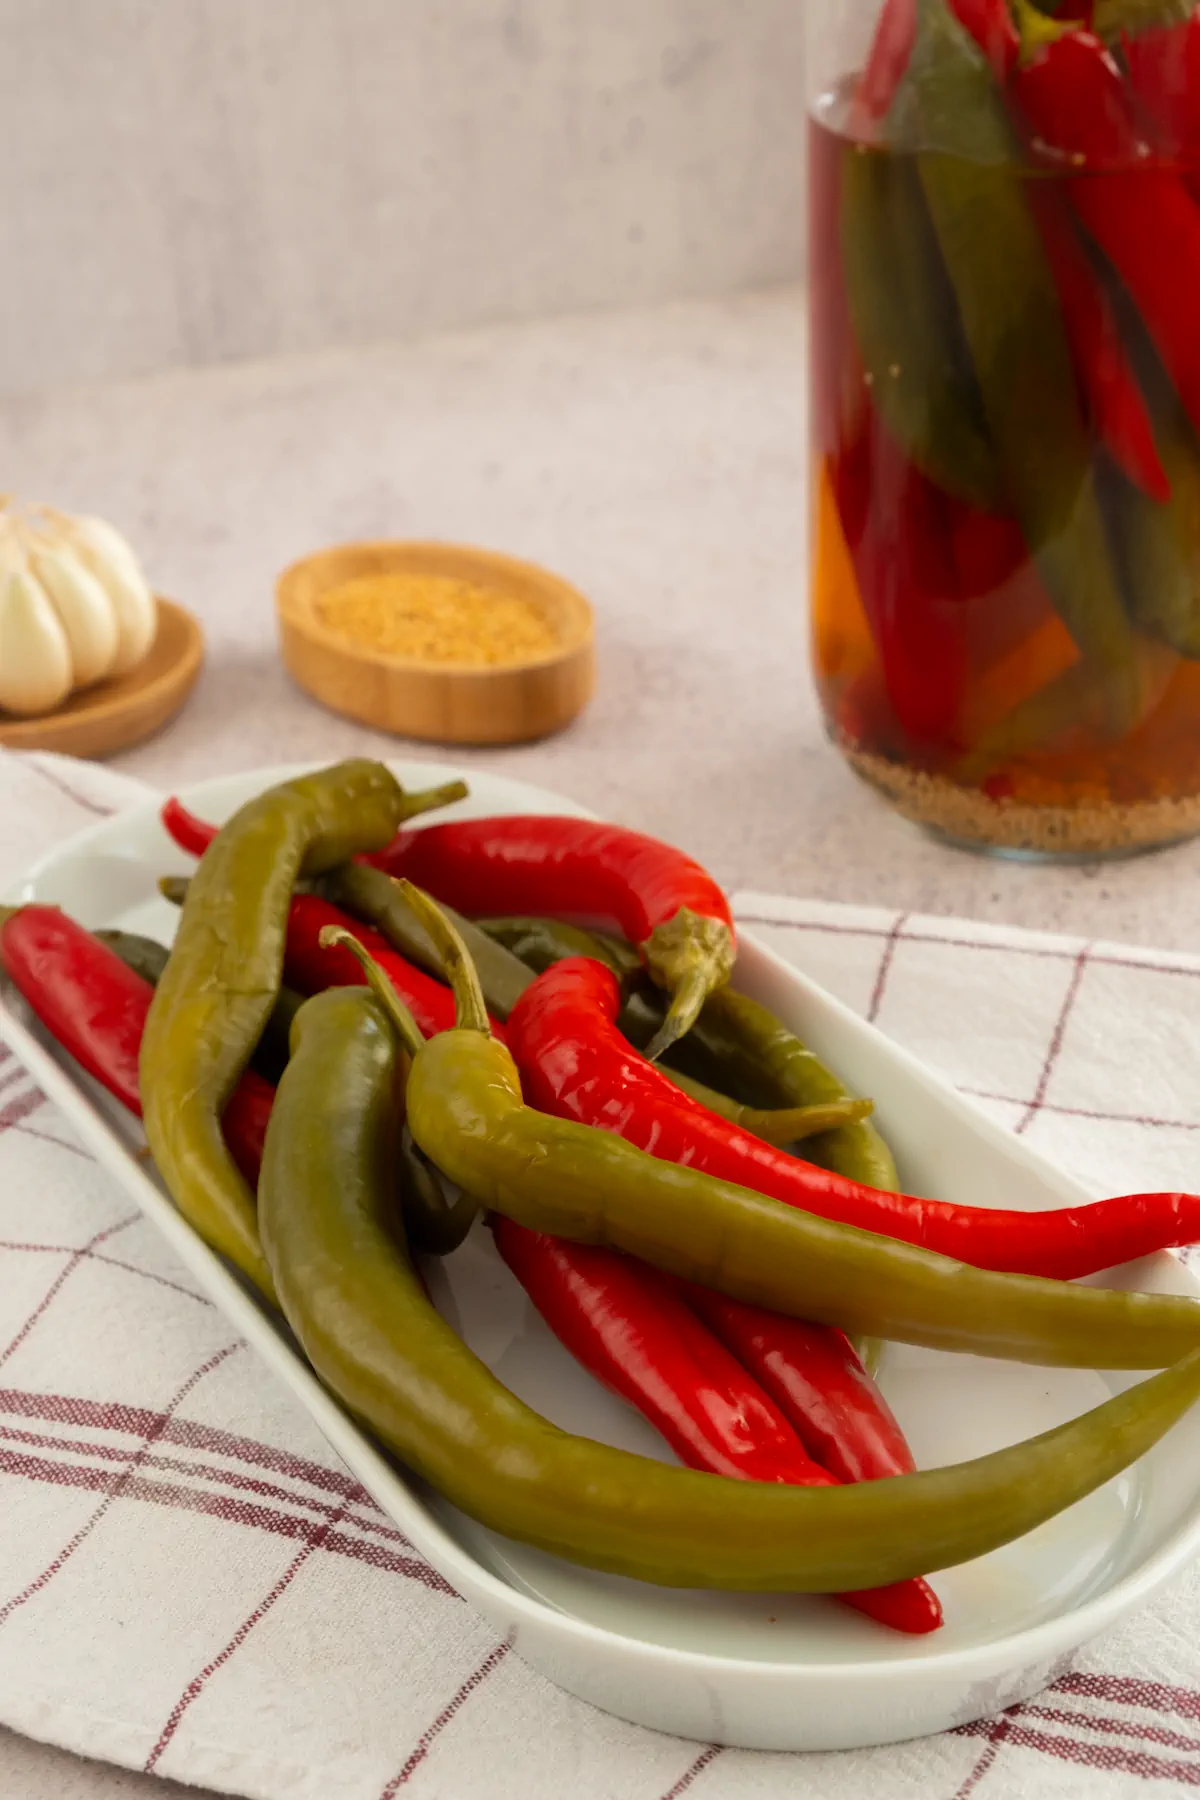 Pickled peppers served on a plate from a jar of pickles.